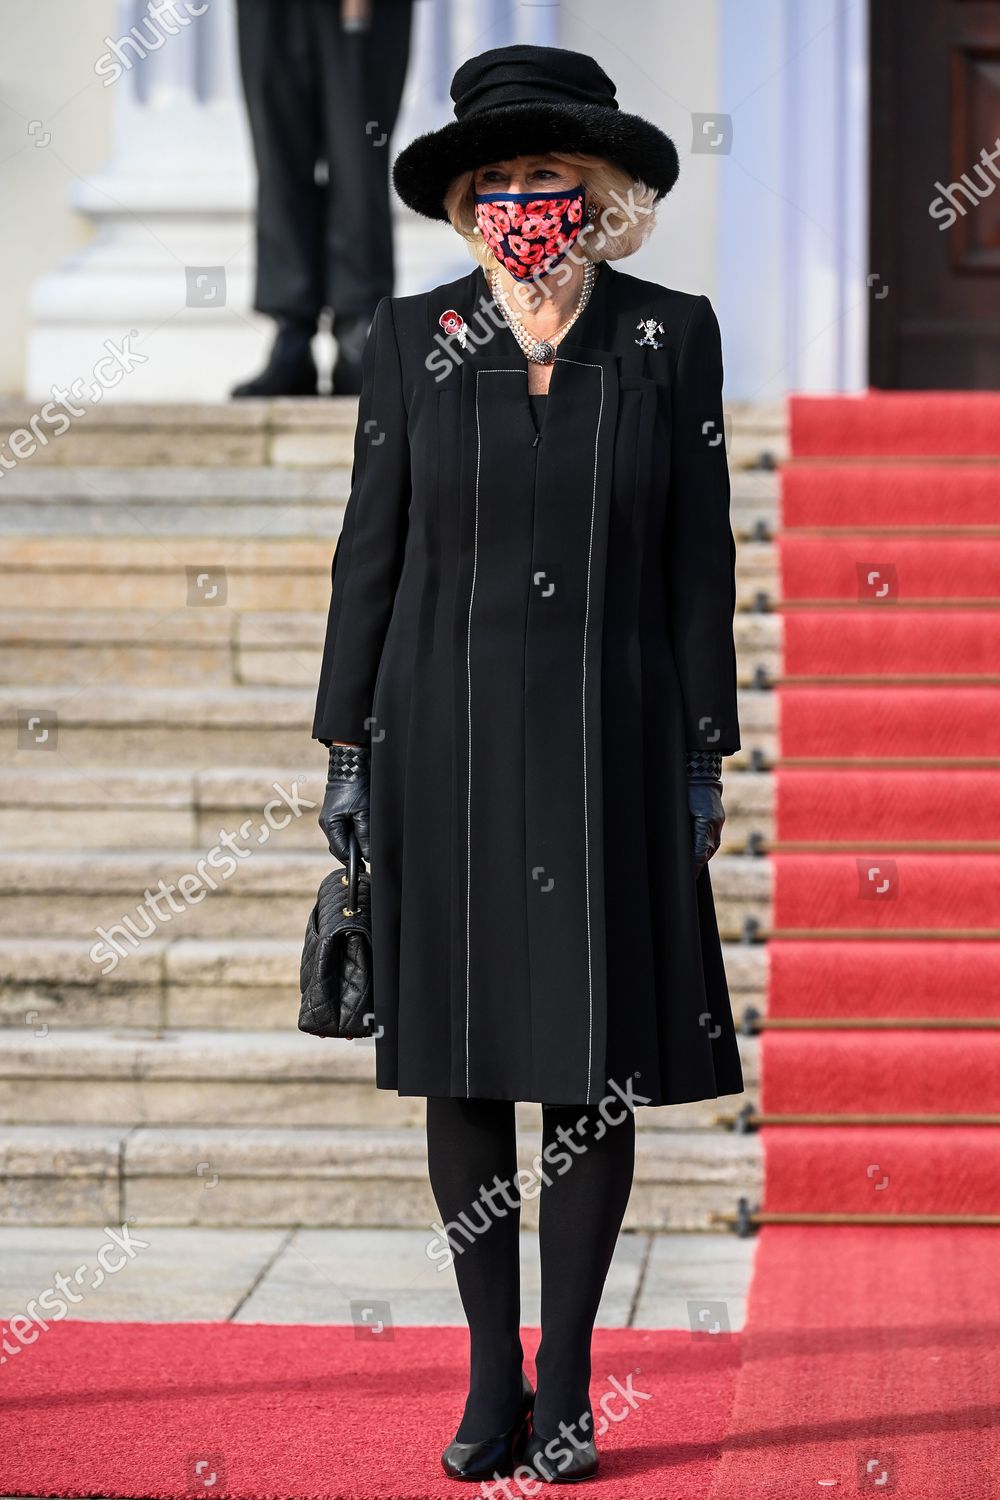 prince-charles-and-camilla-duchess-of-cornwall-visit-to-berlin-germany-shutterstock-editorial-11016282f.jpg